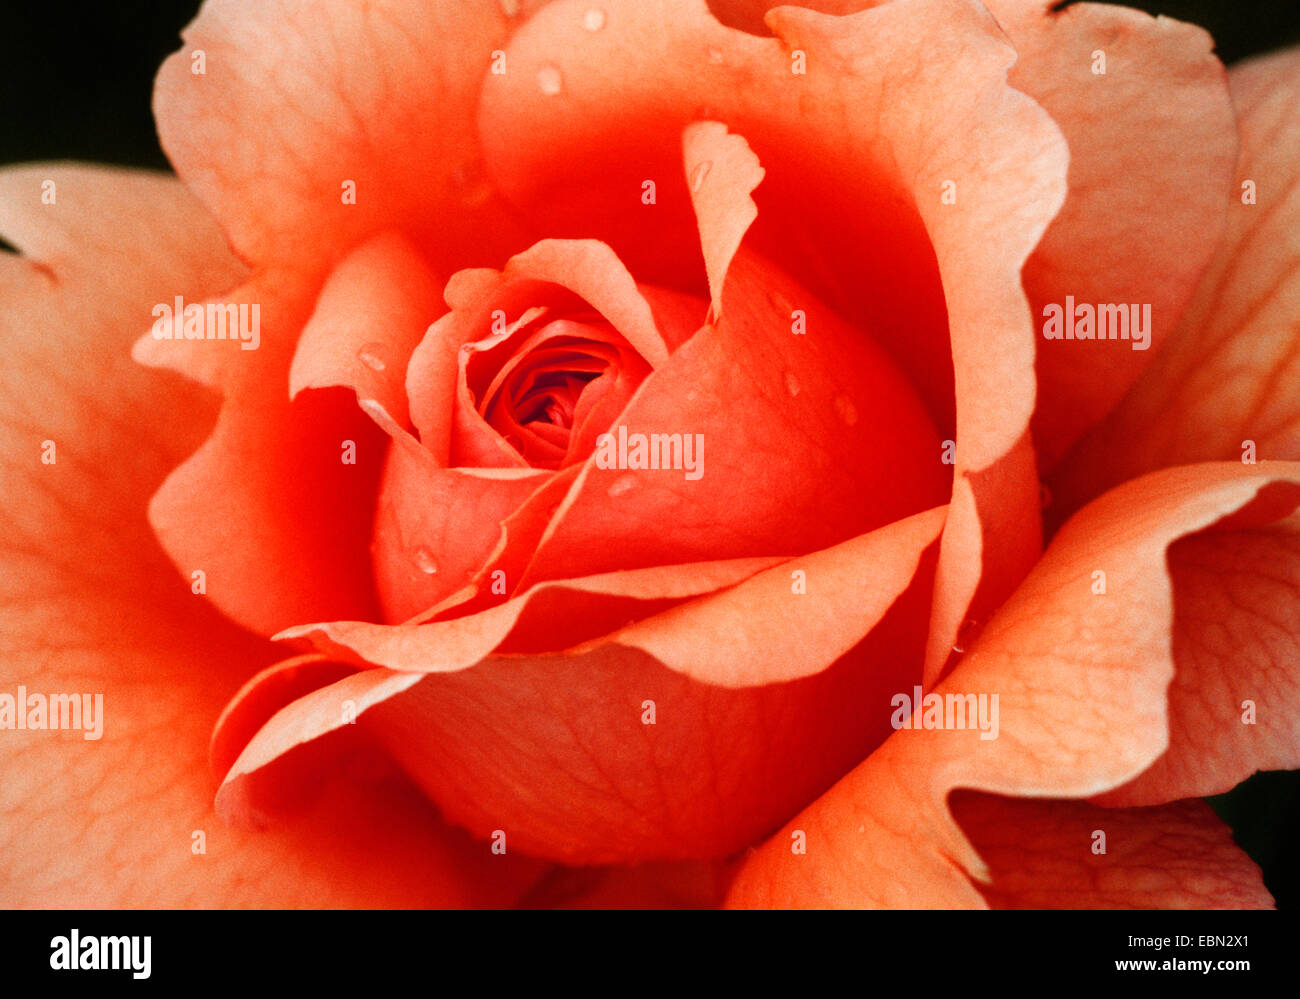 rose (Rosa spec.), detail of the blossoms, Germany Stock Photo